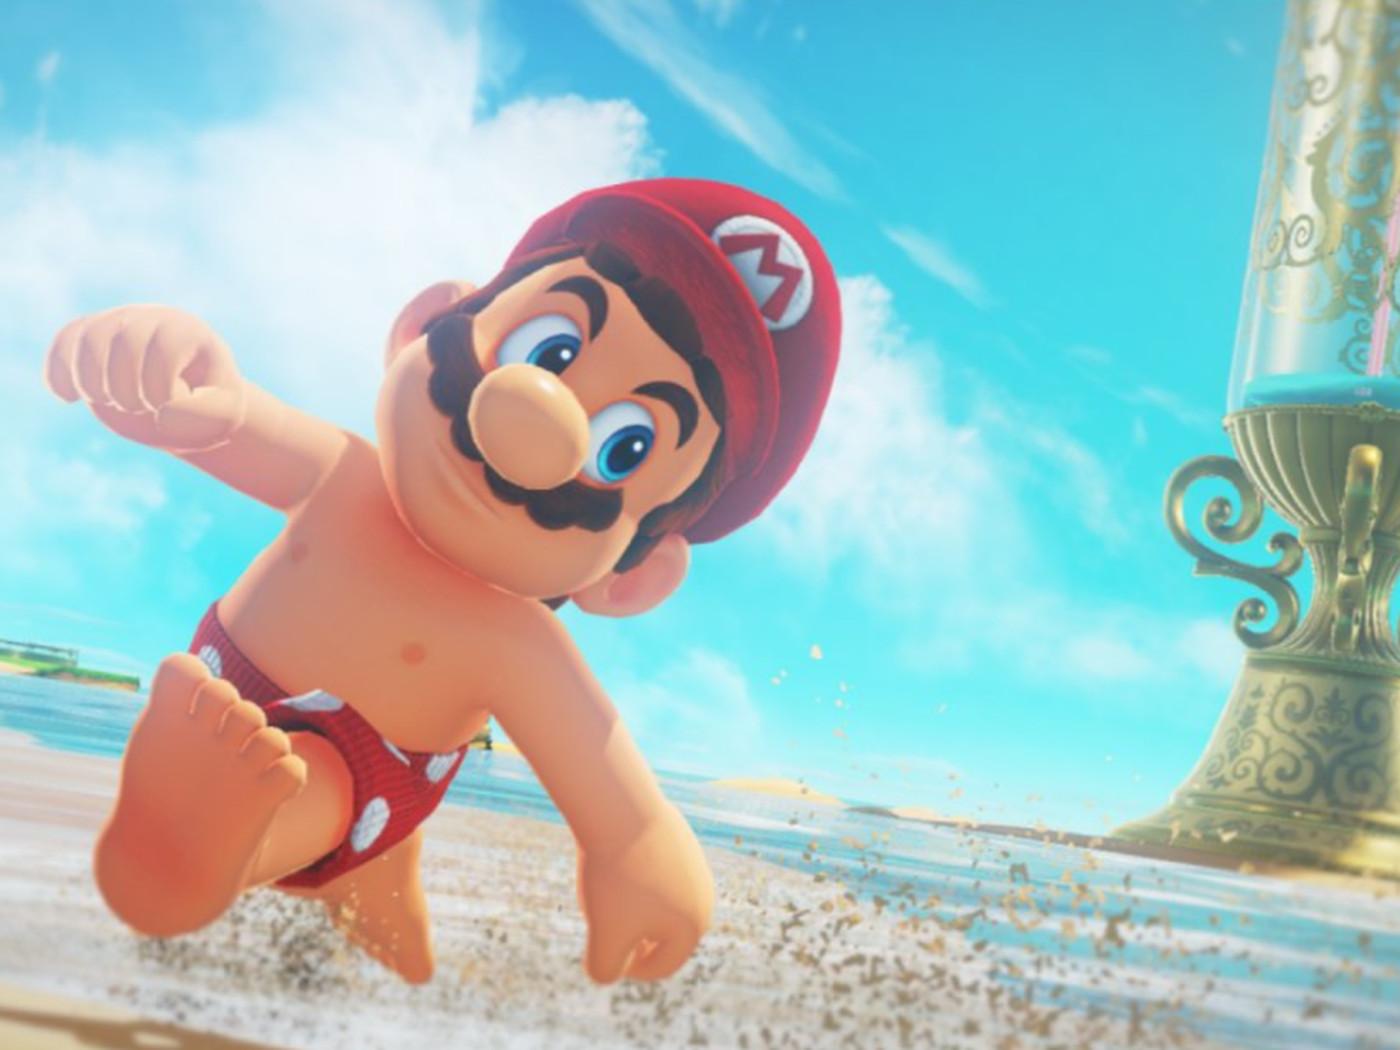 Shirtless Mario is another example of Nintendo trying to prove